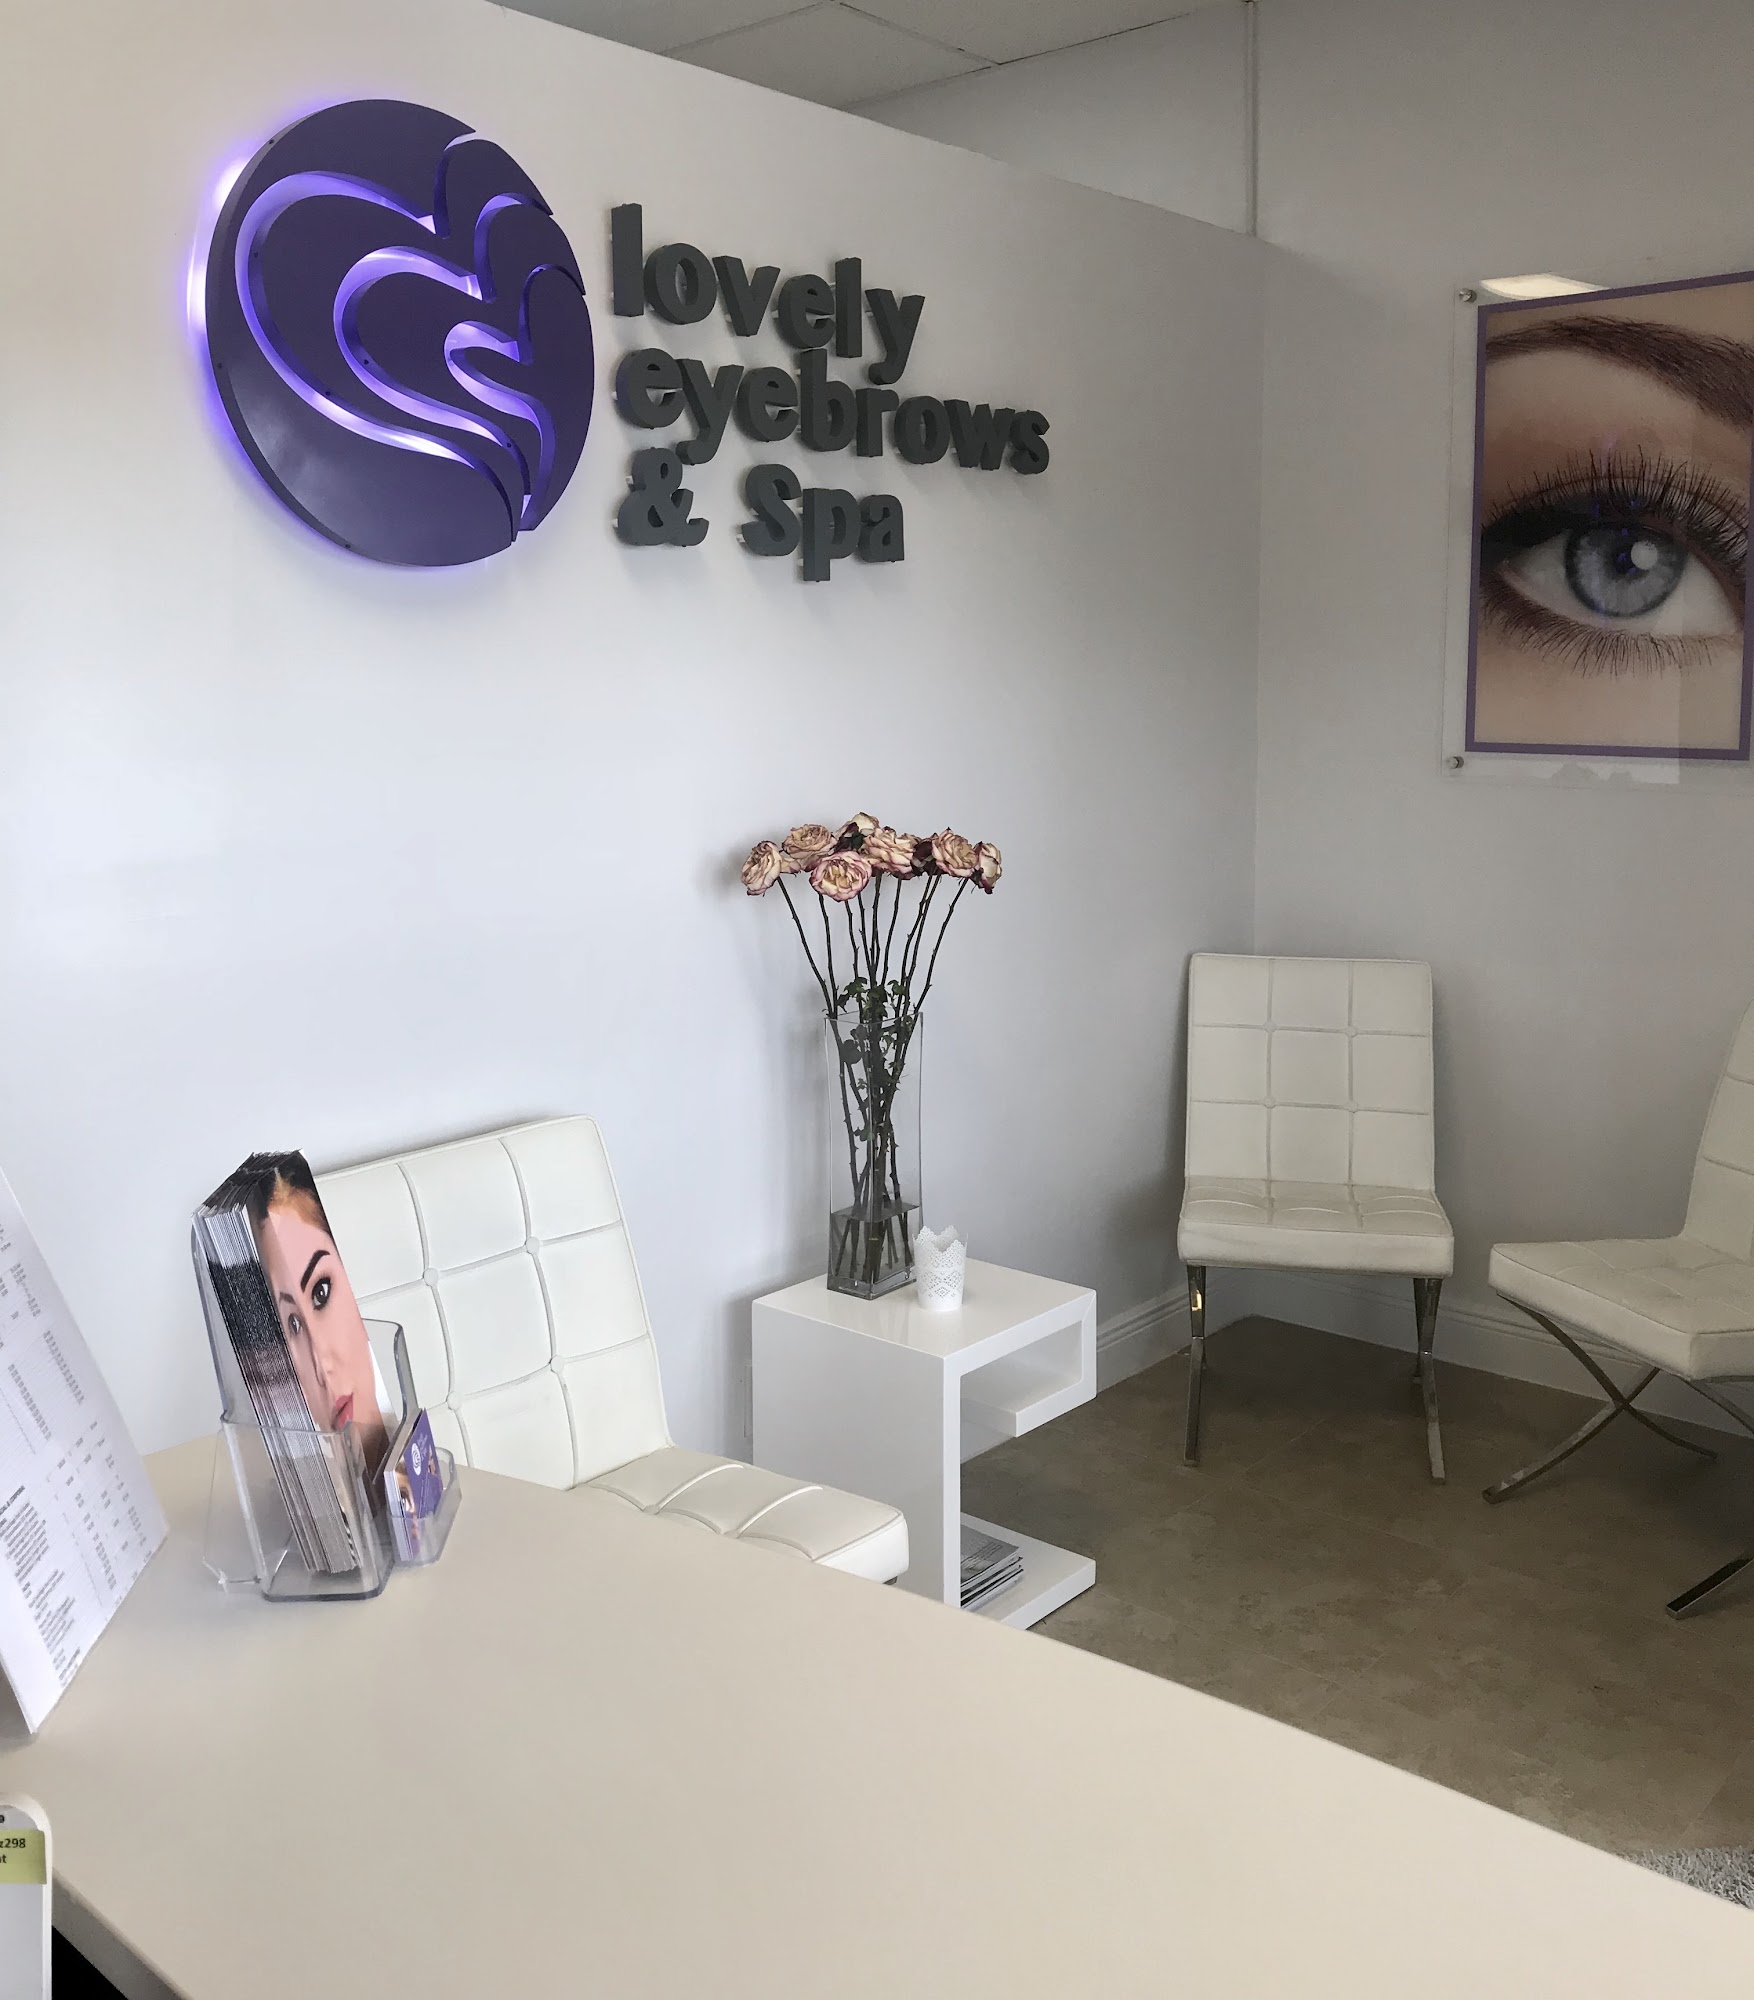 Lovely Eyebrows & Spa Coral Springs